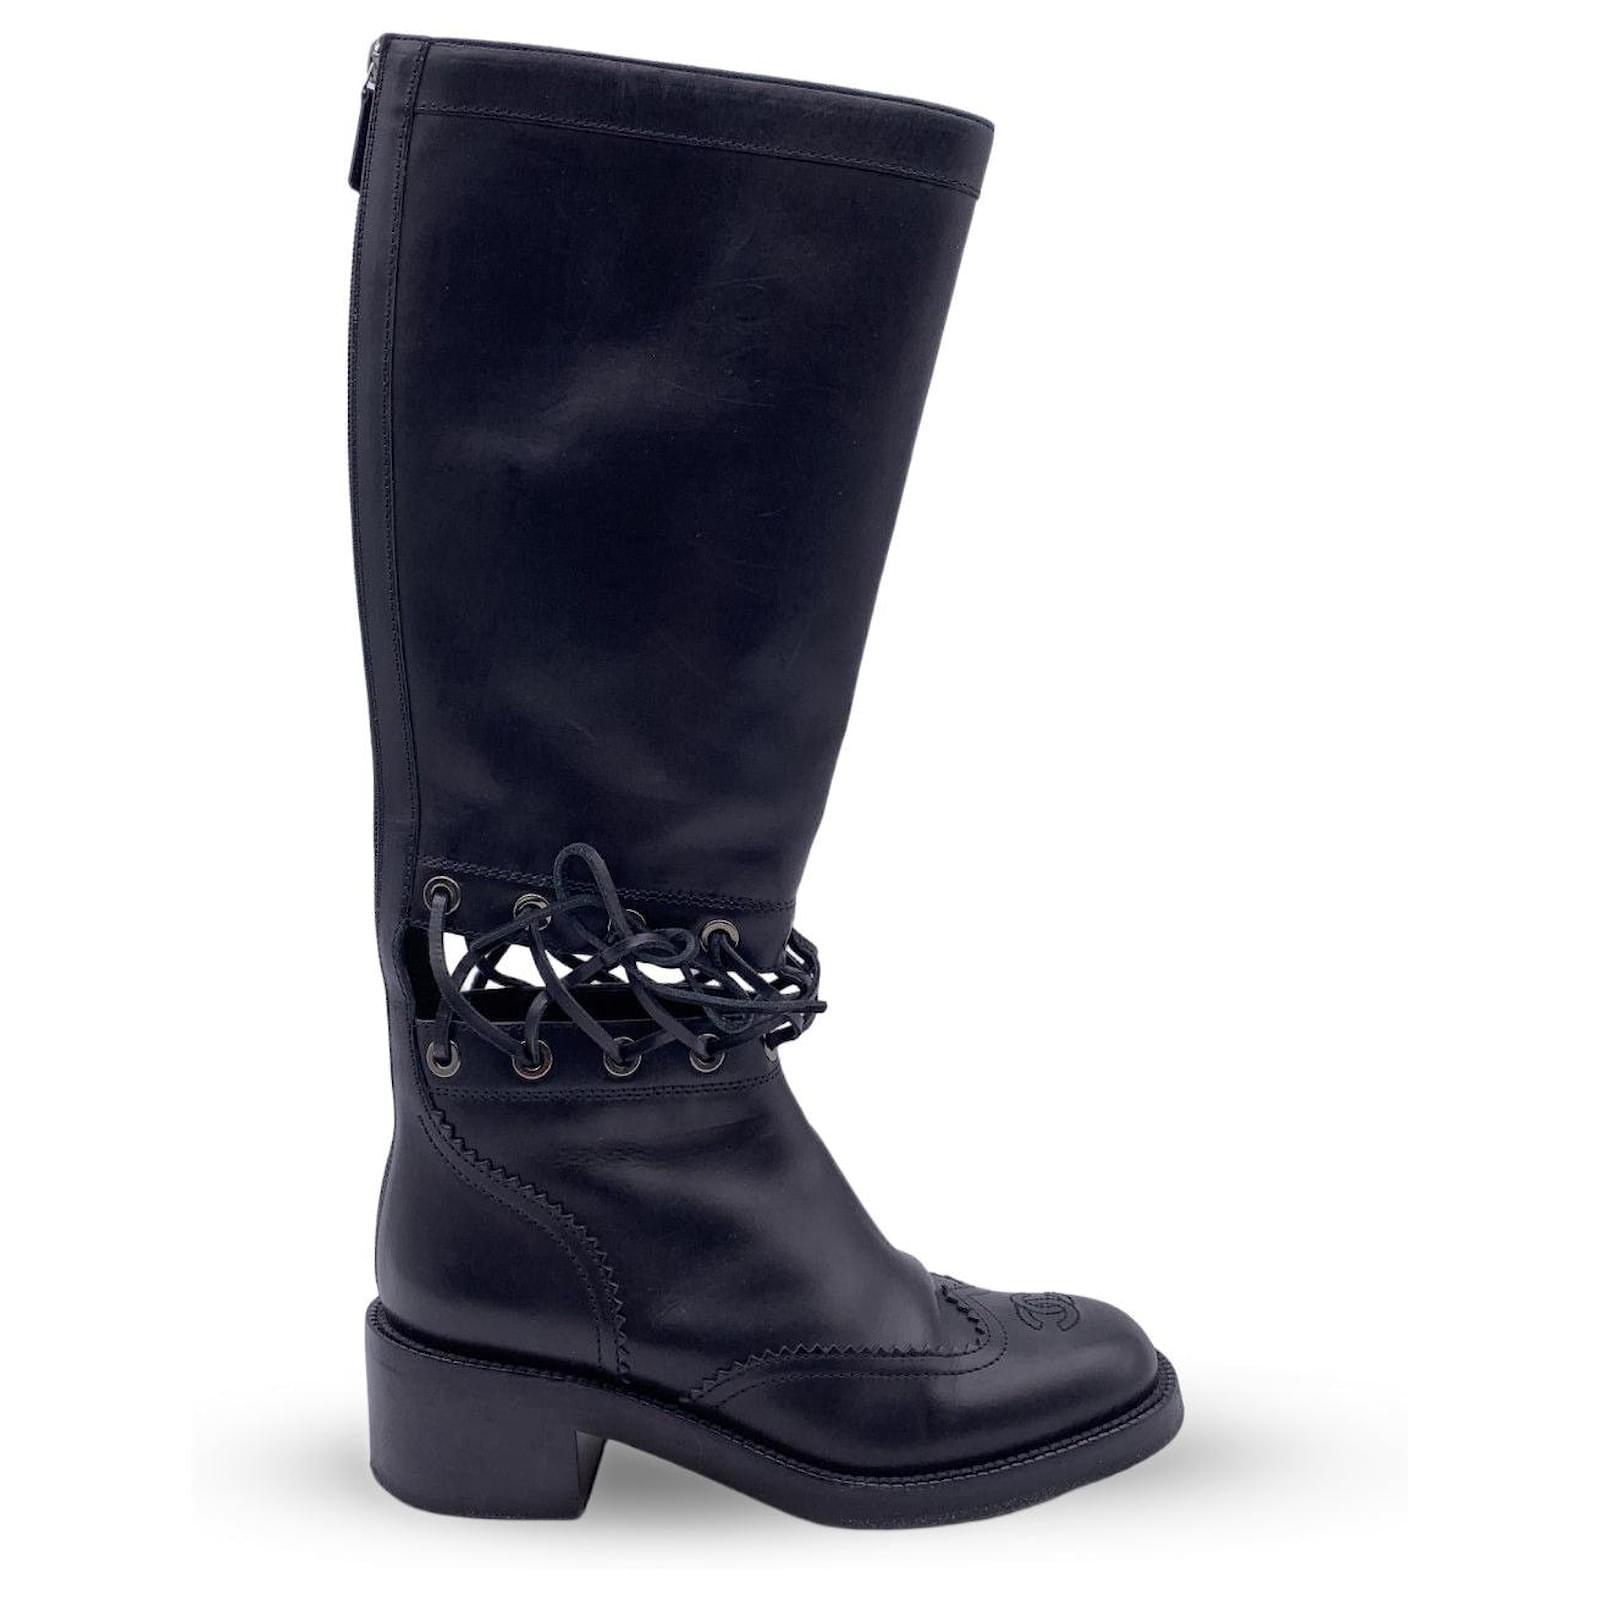 Chanel short boots size 39.5 black with silver - Gem